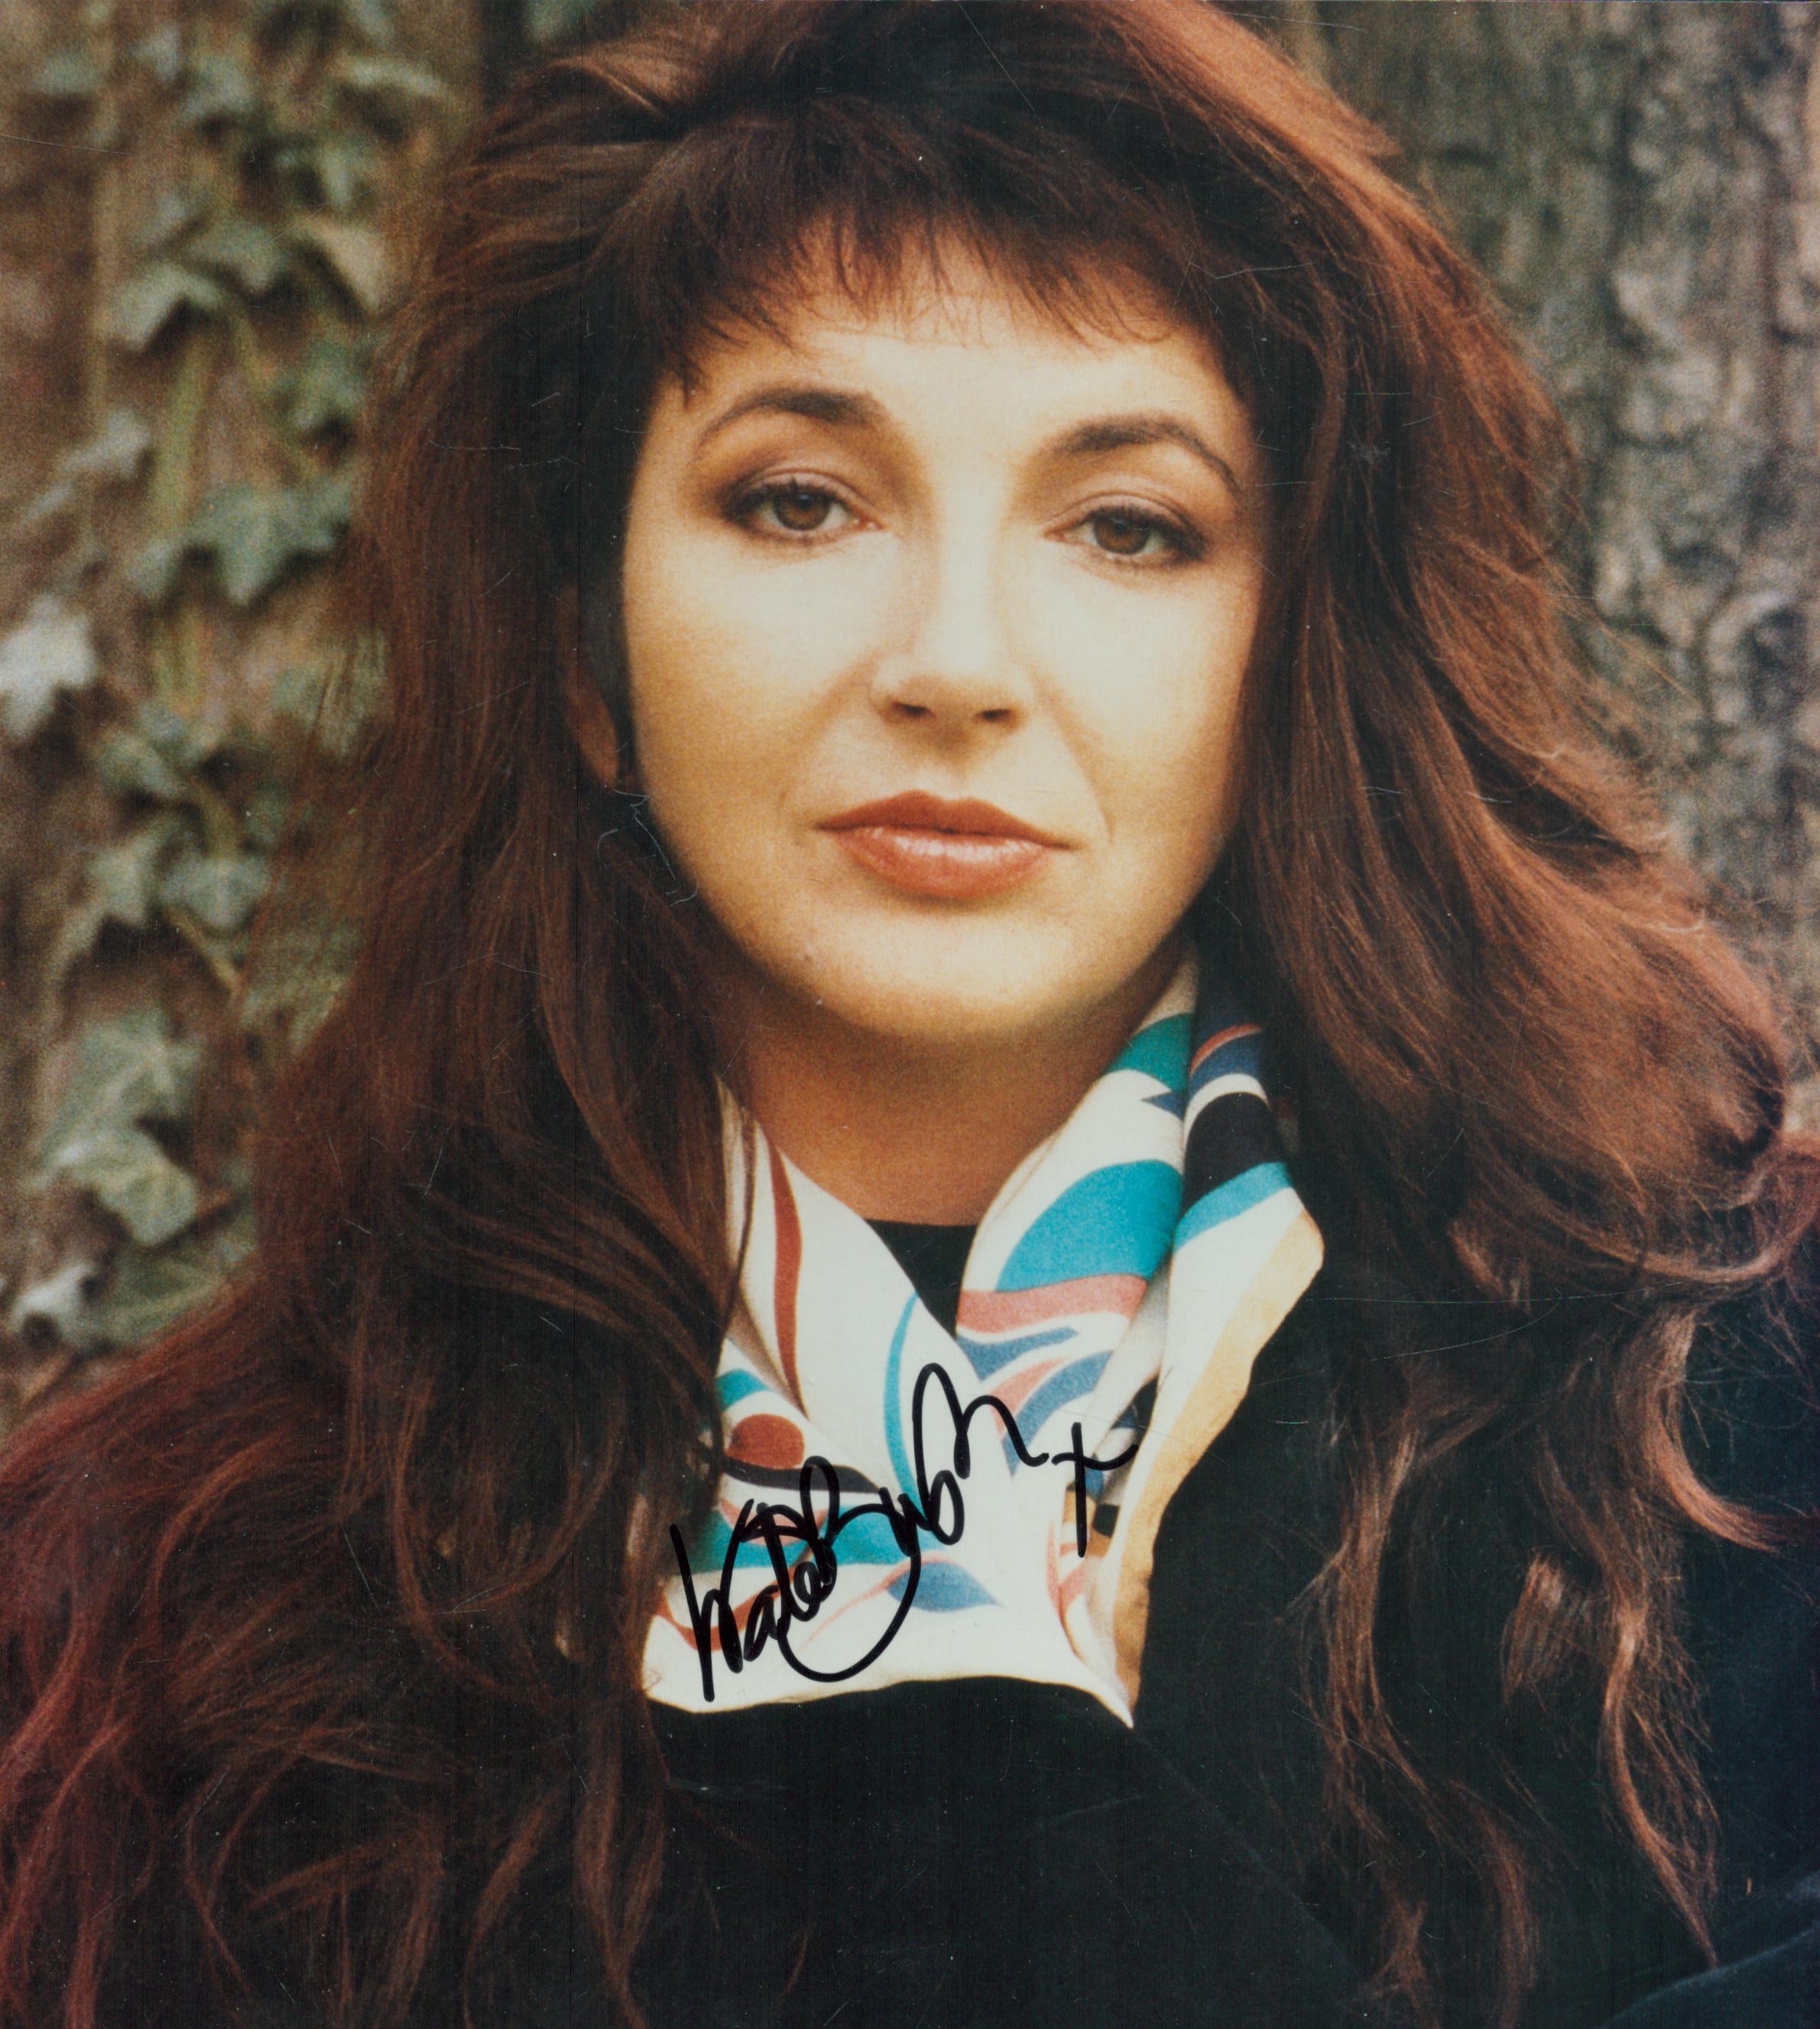 Kate Bush signed 10x8 inch colour photo. Good condition. All autographs come with a Certificate of